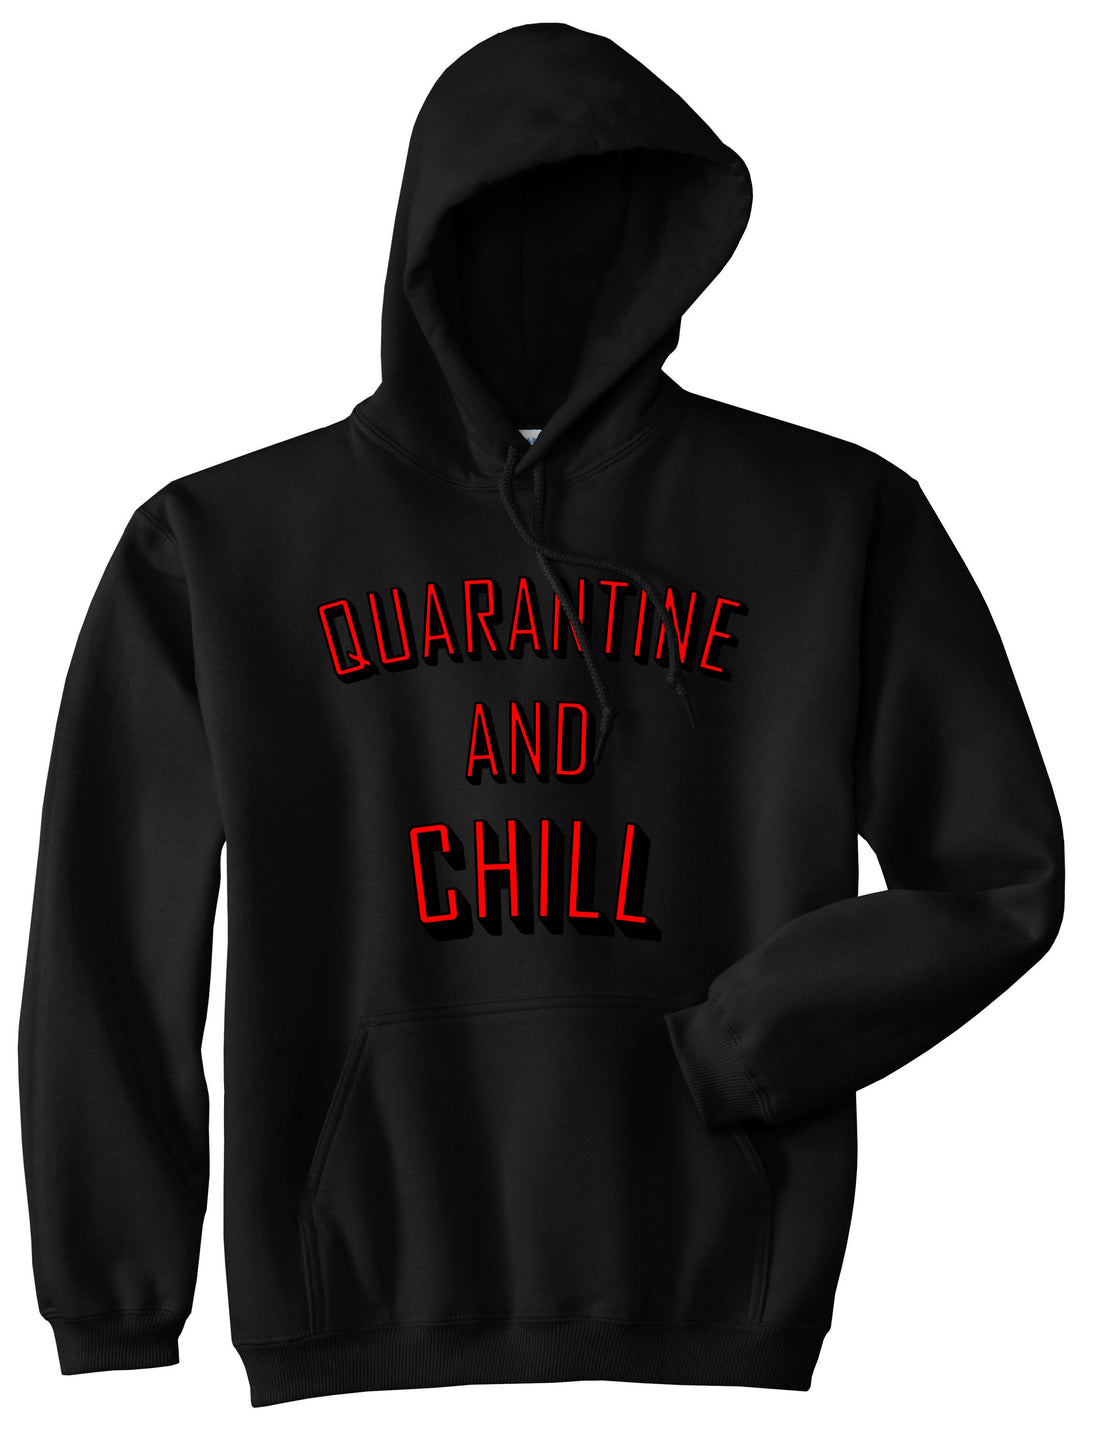 Quarantine And Chill Funny Meme Pullover Hoodie Black